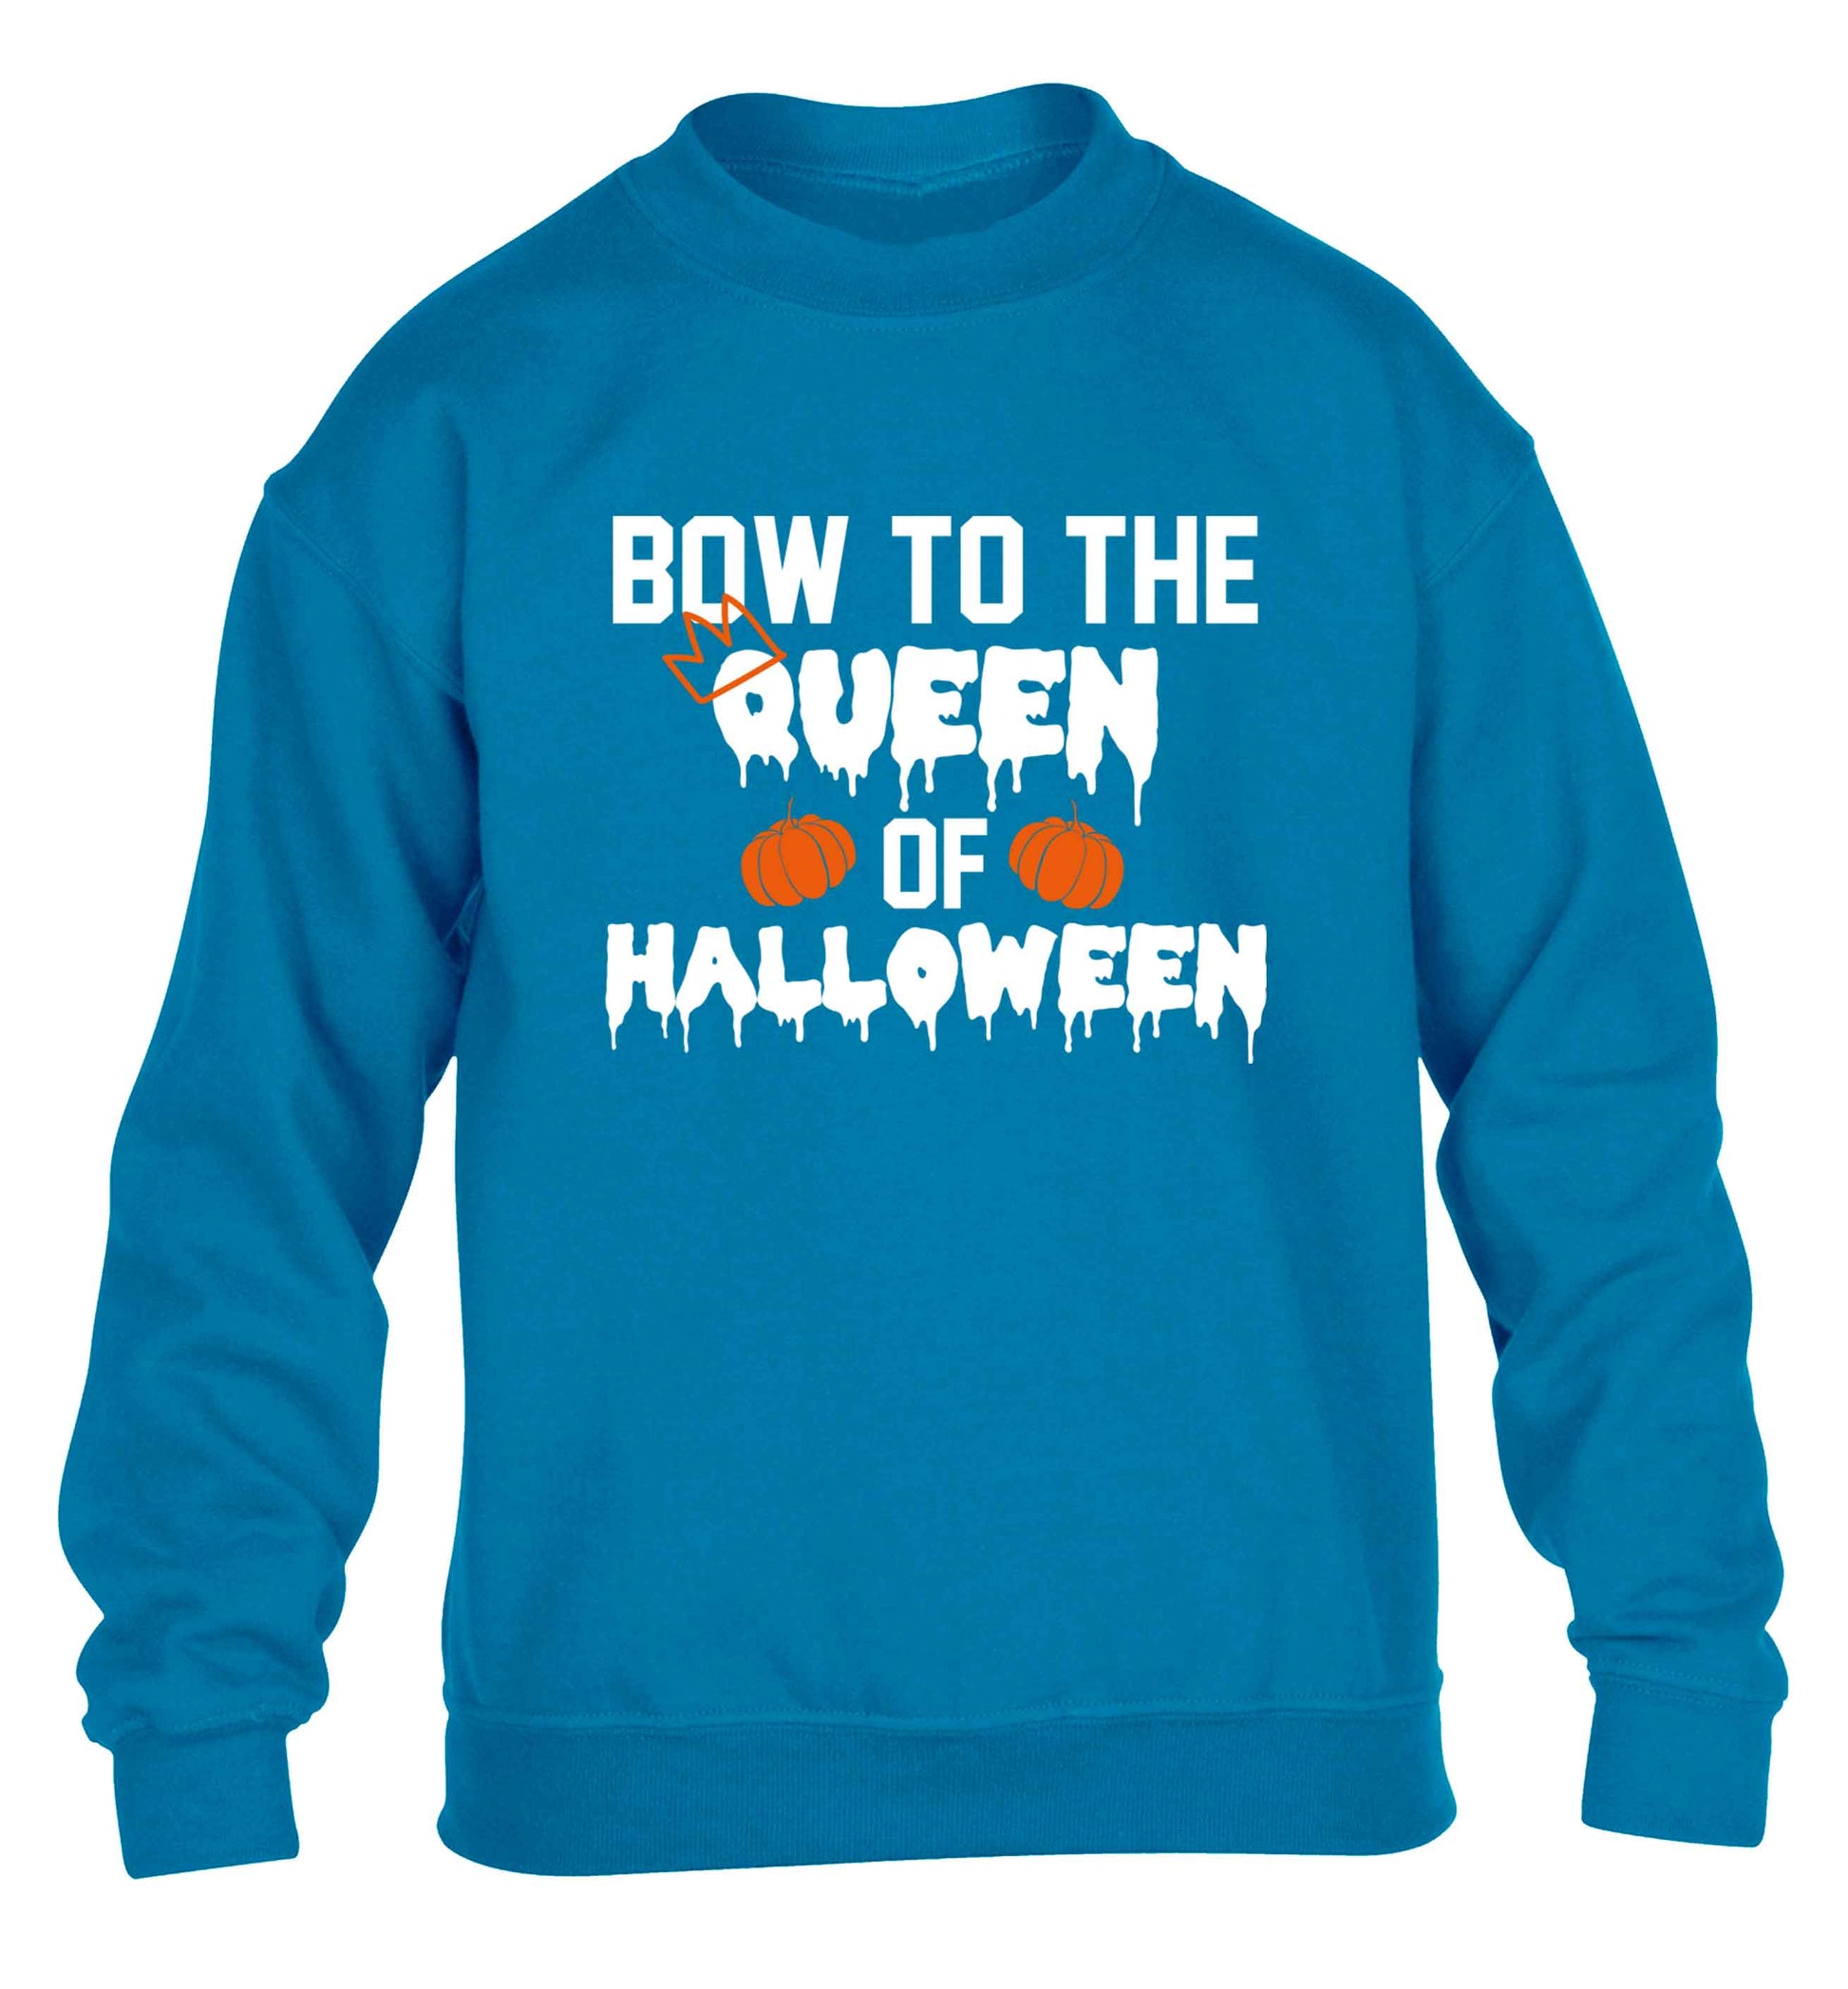 Bow to the Queen of halloween children's blue sweater 12-13 Years